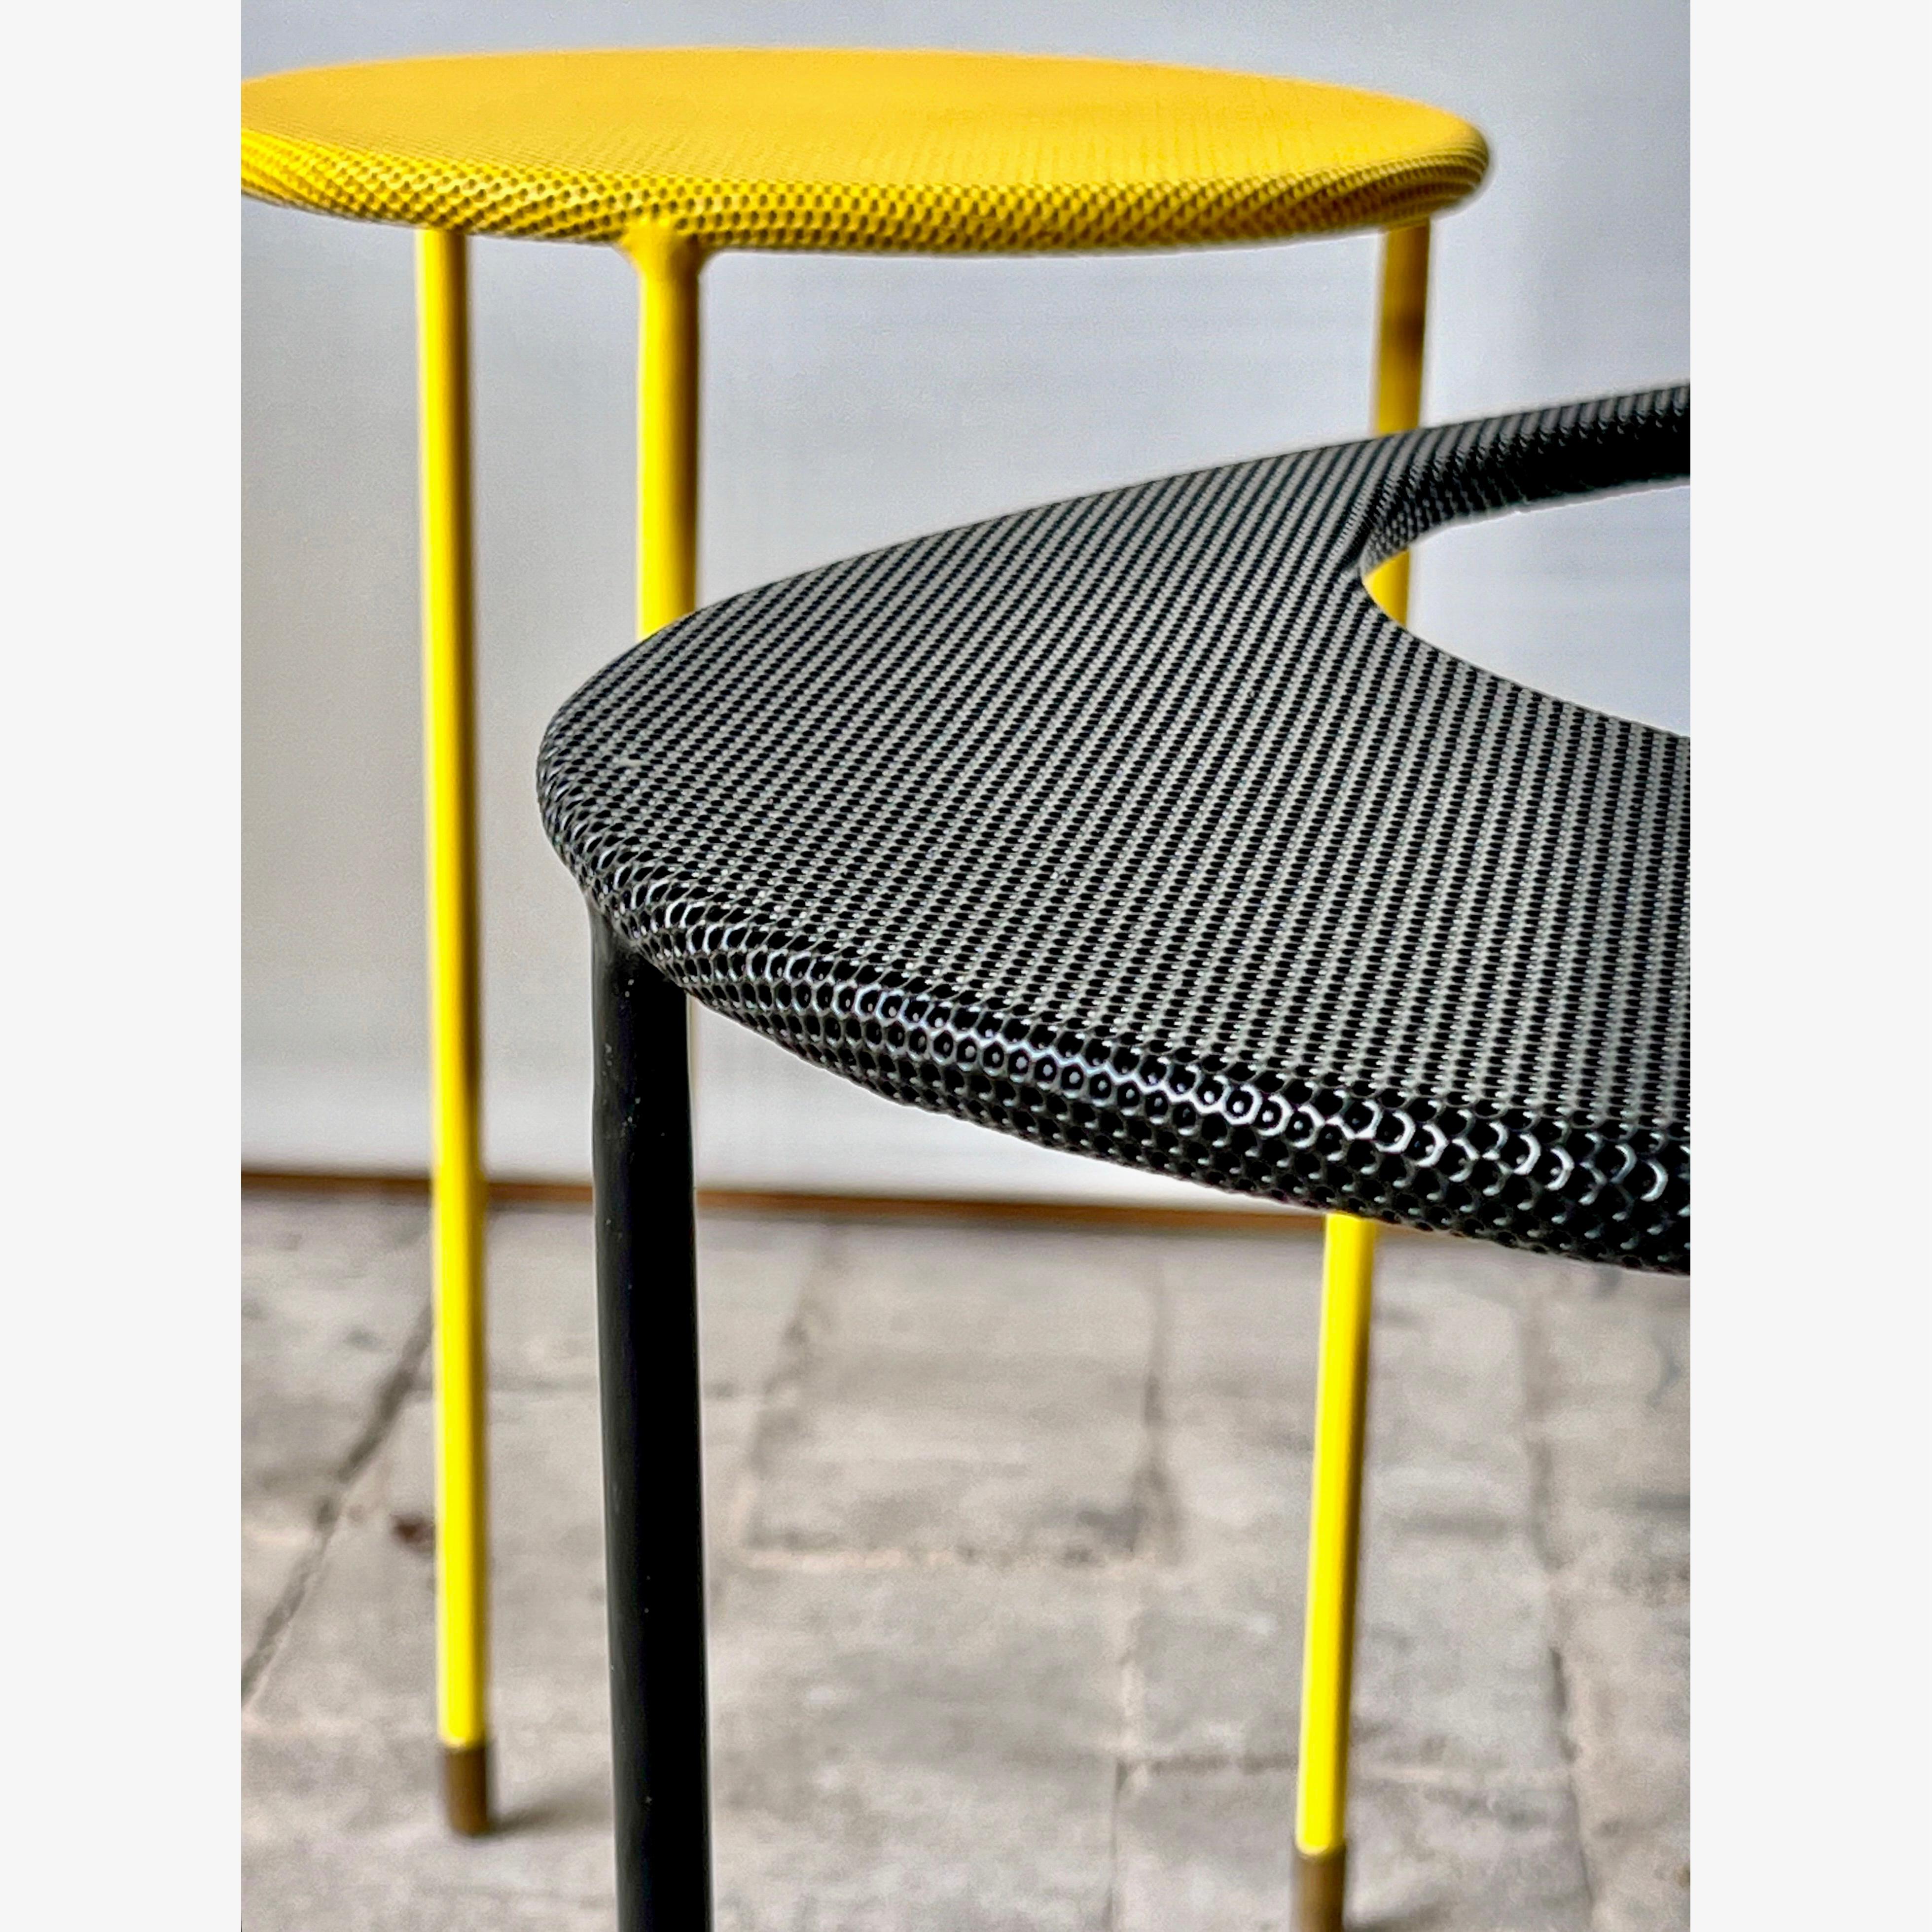 Mathieu Mategot Kangaroo side tables, set of two in black & yellow, for Gubi For Sale 1